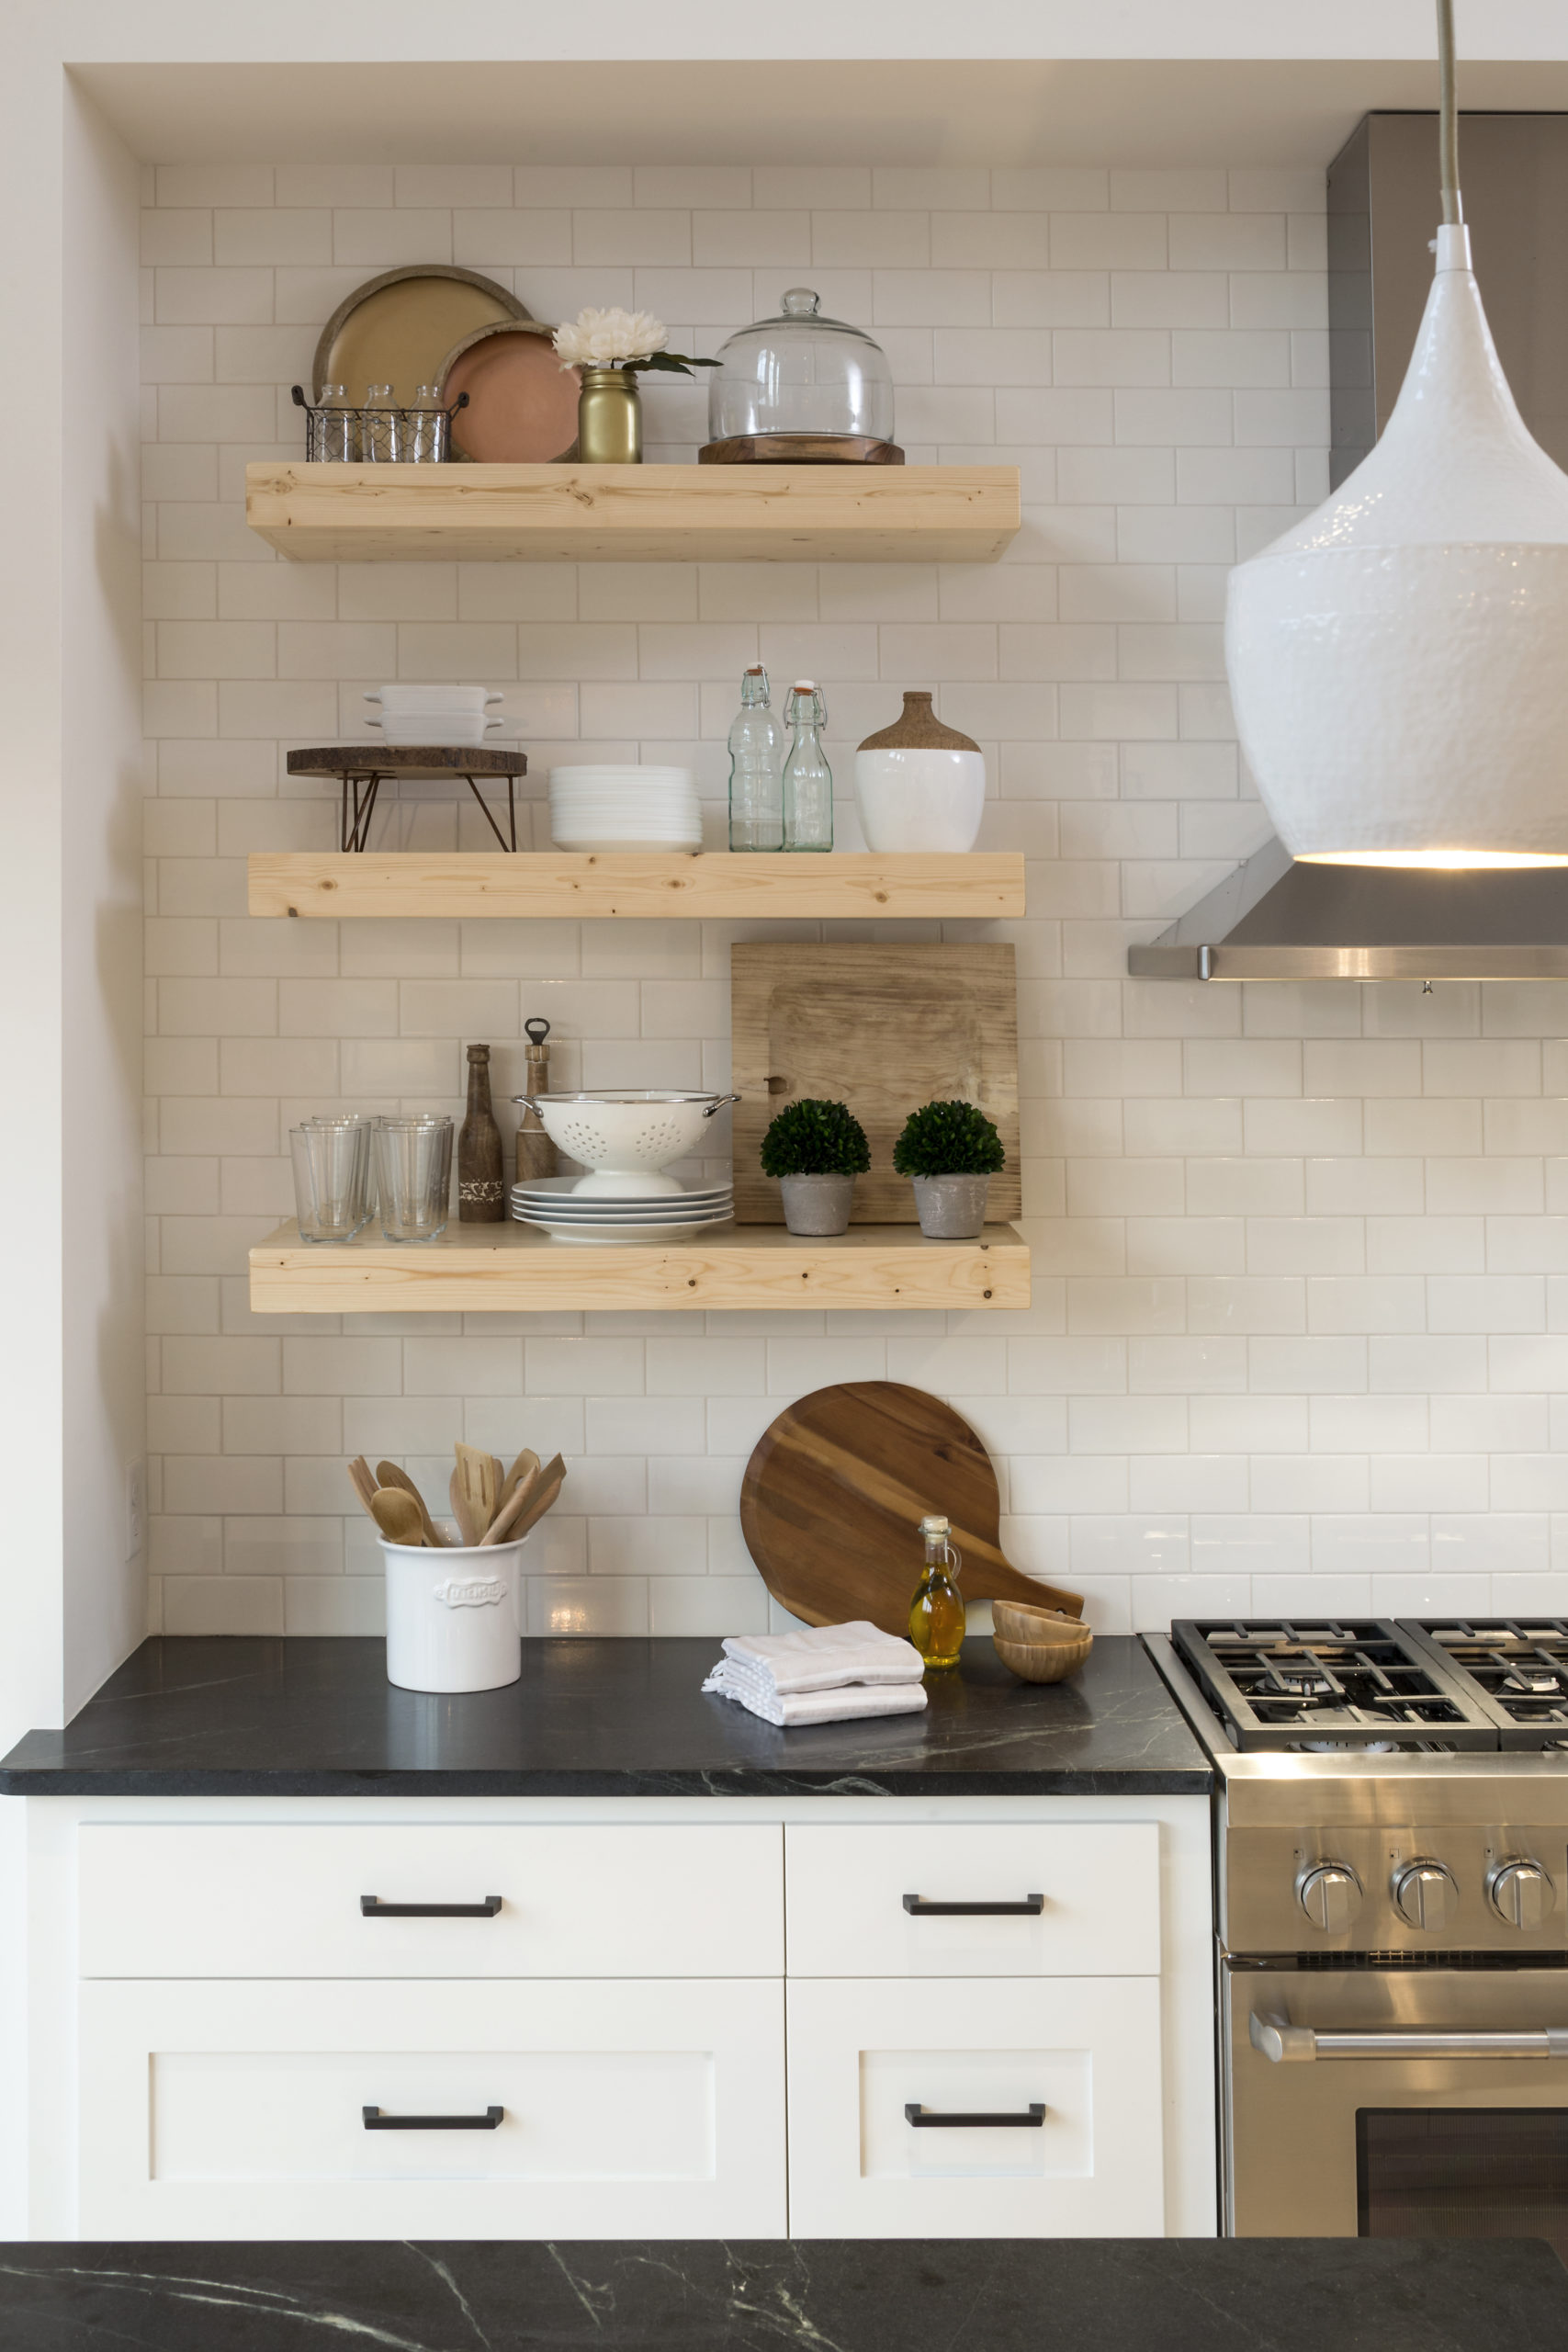 Kitchen wooden shelves hanging on white brick wall by stove accessorized by Ruby & Suede.